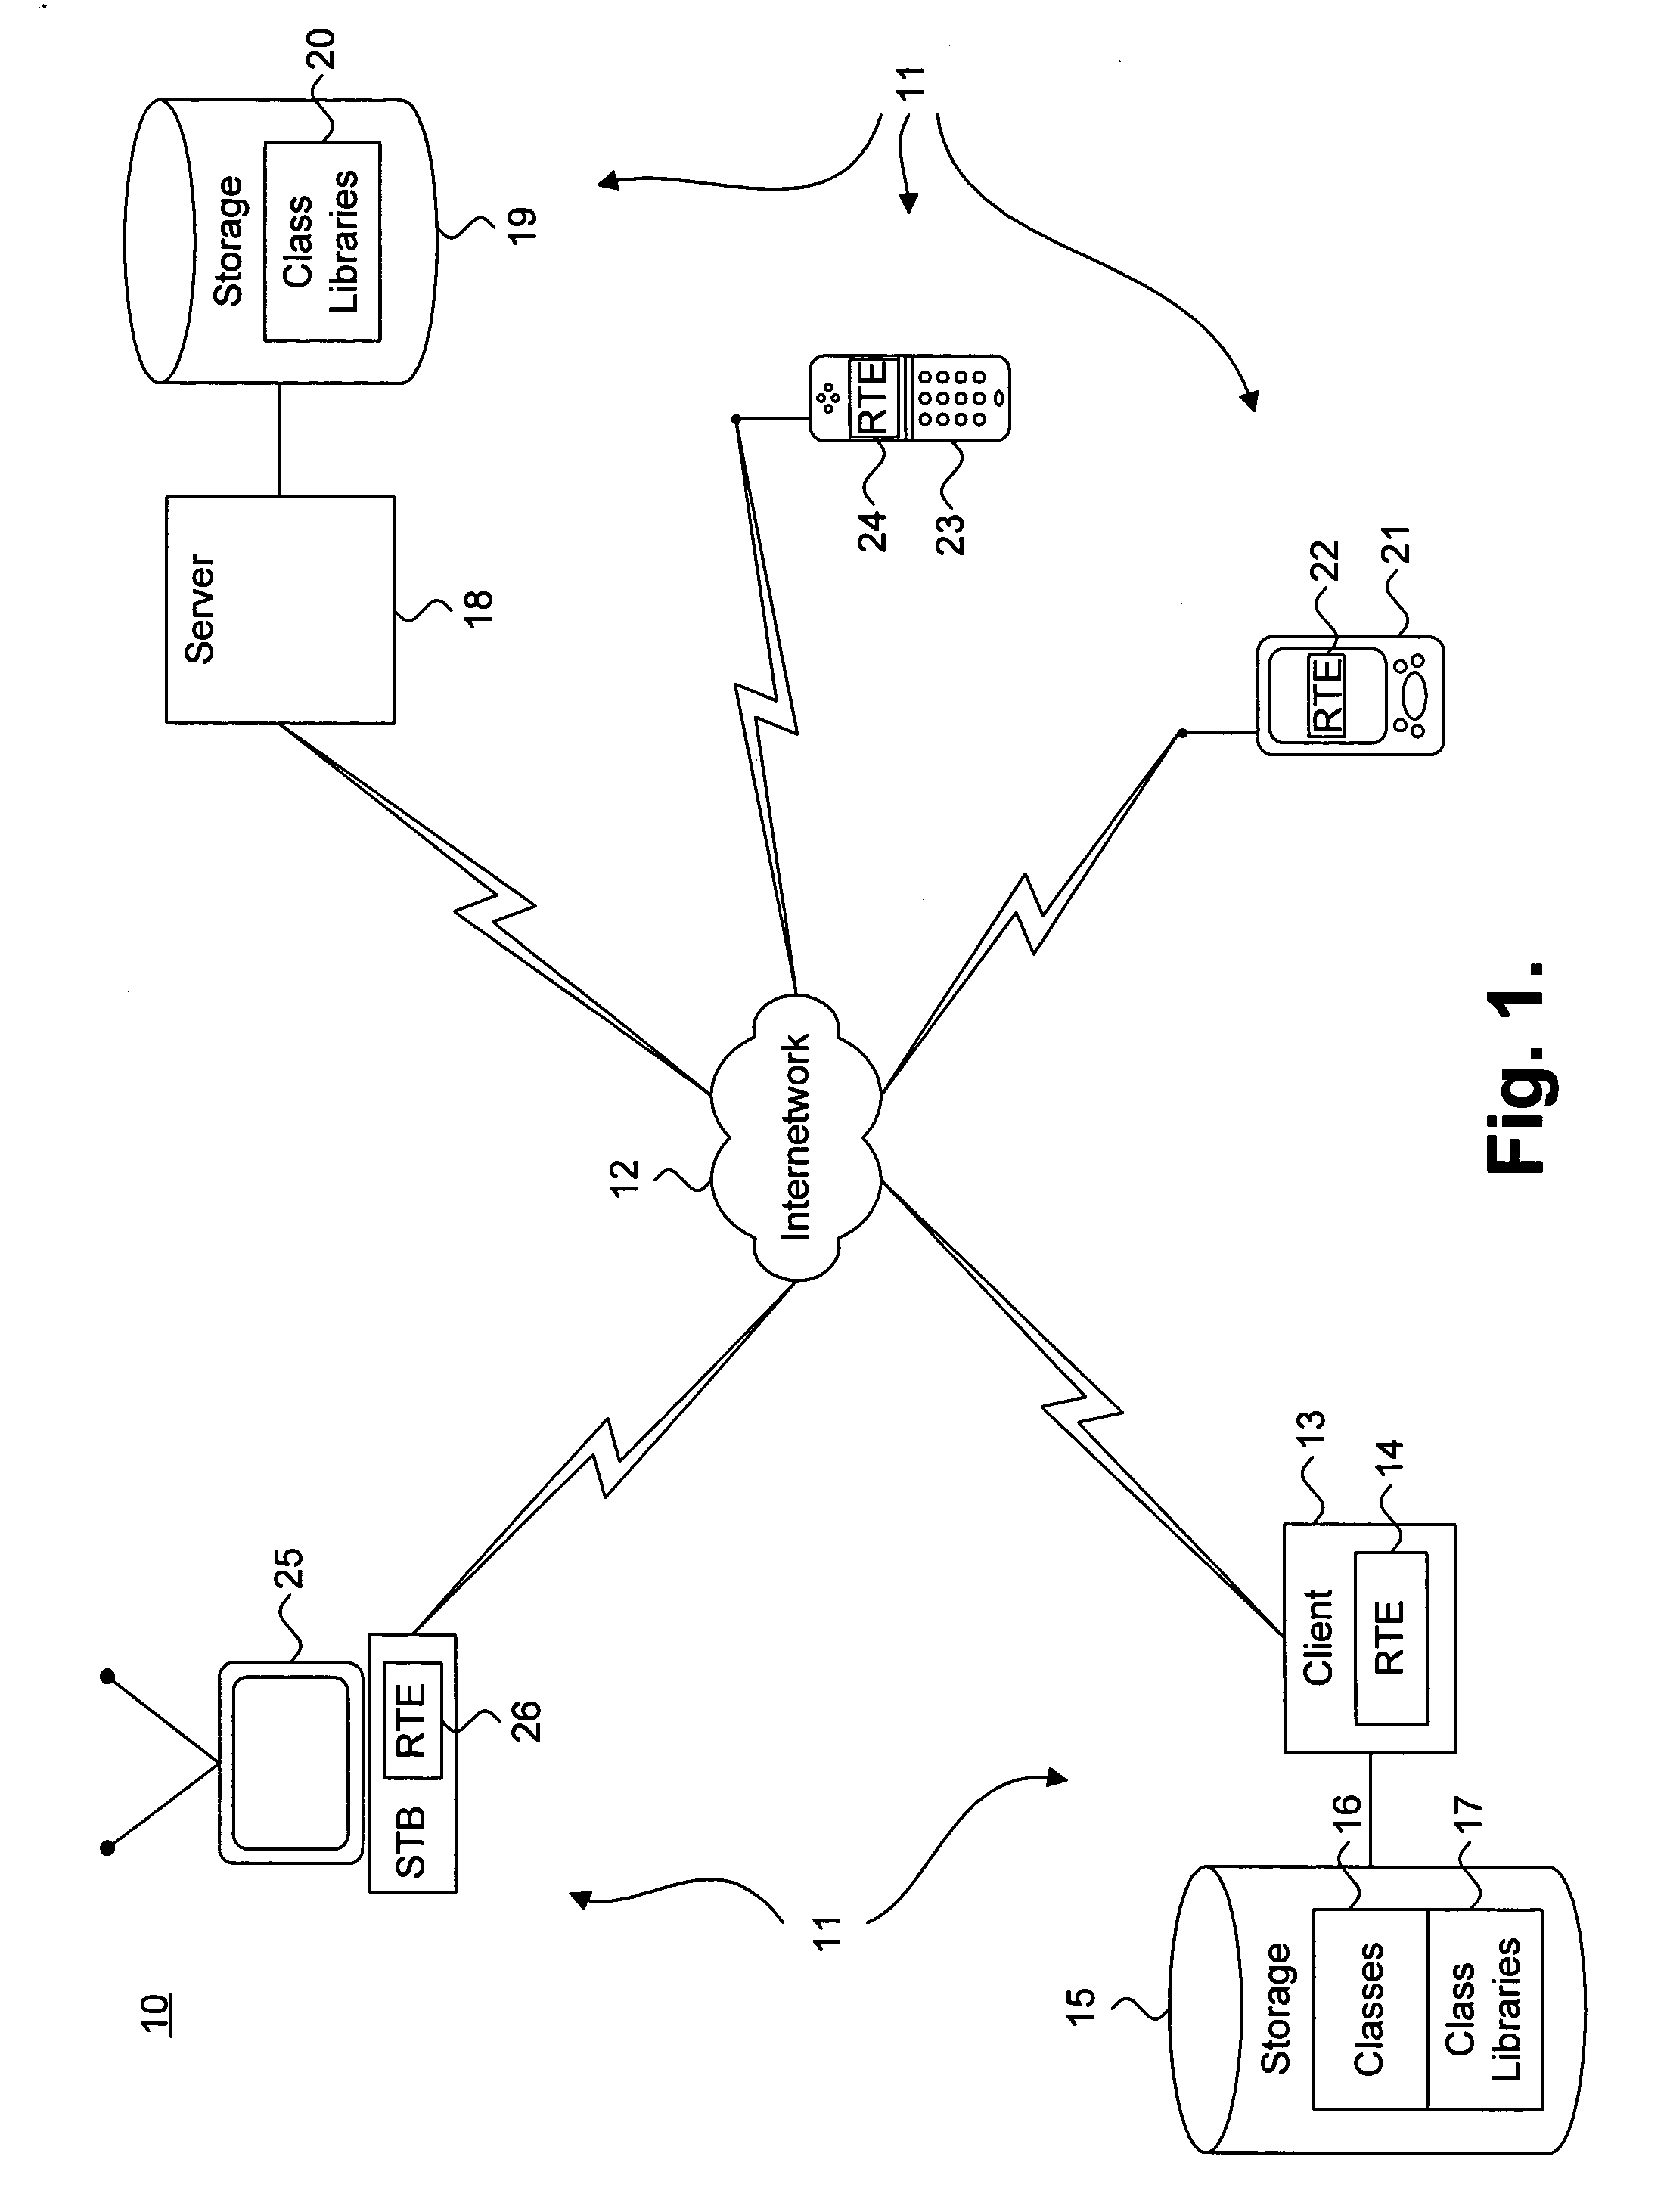 System and method for performing speculative initialization of application models for a cloned runtime system process